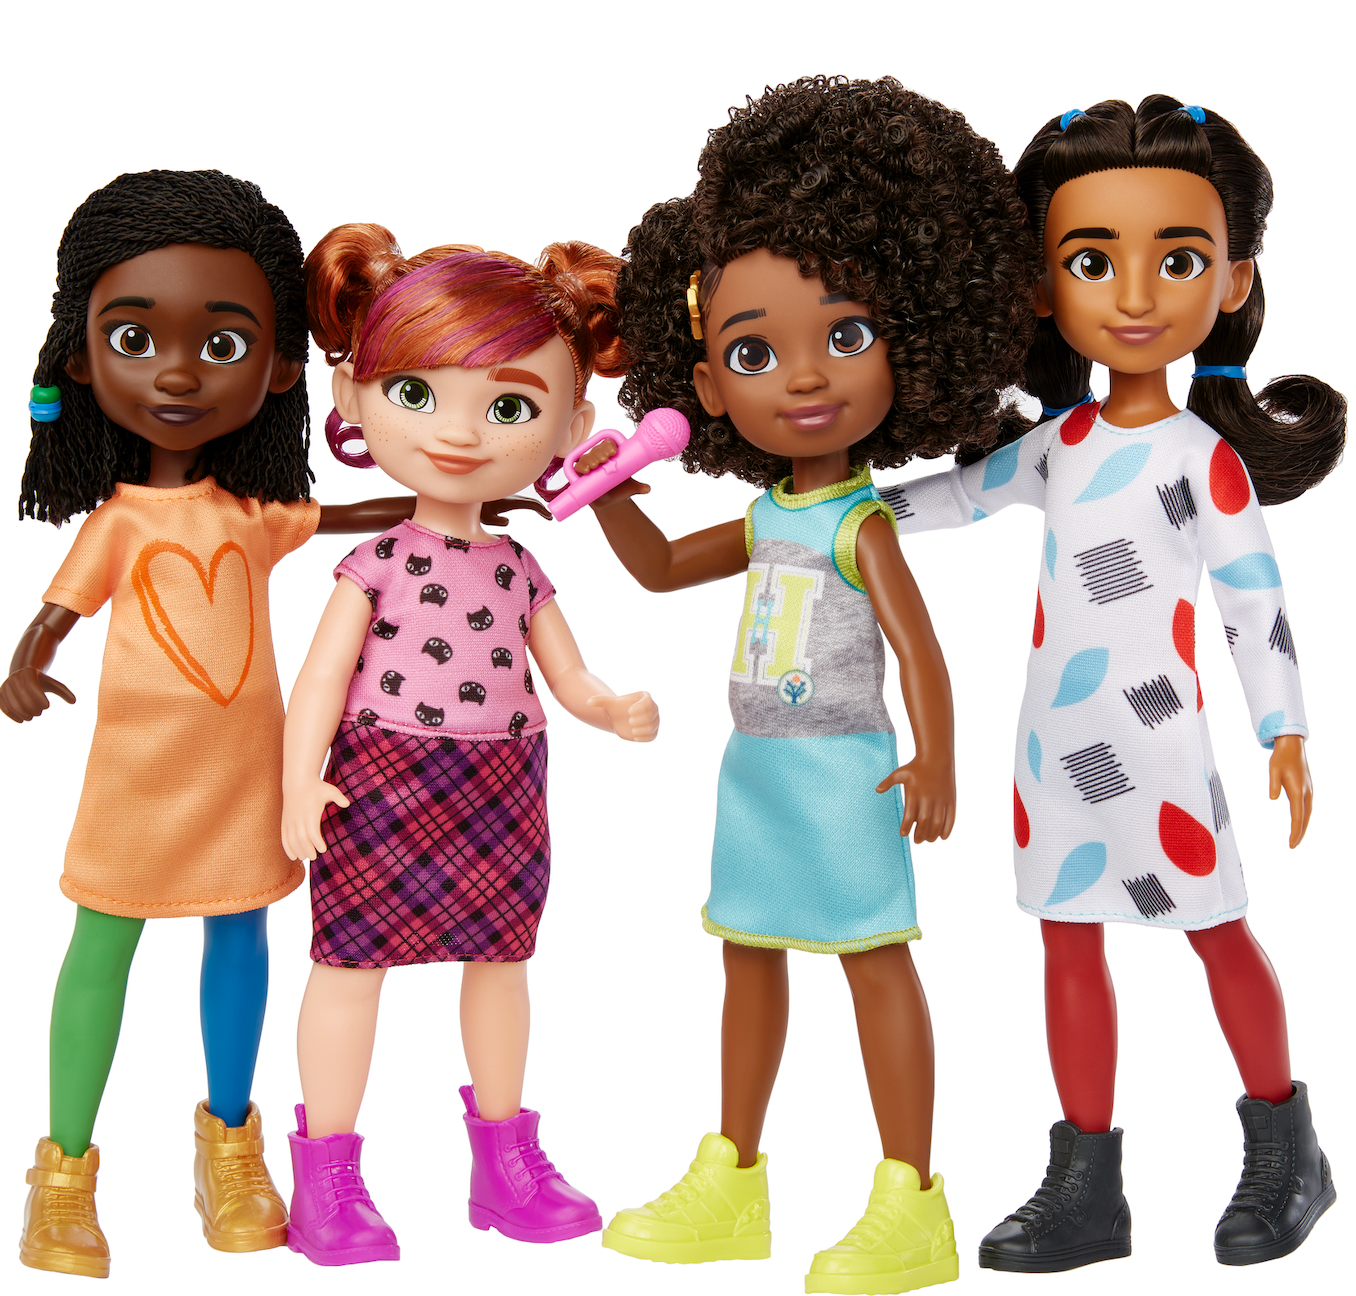 Ludacris Launches Line of Dolls Inspired by His Hit Netflix Series “Karma’s World”